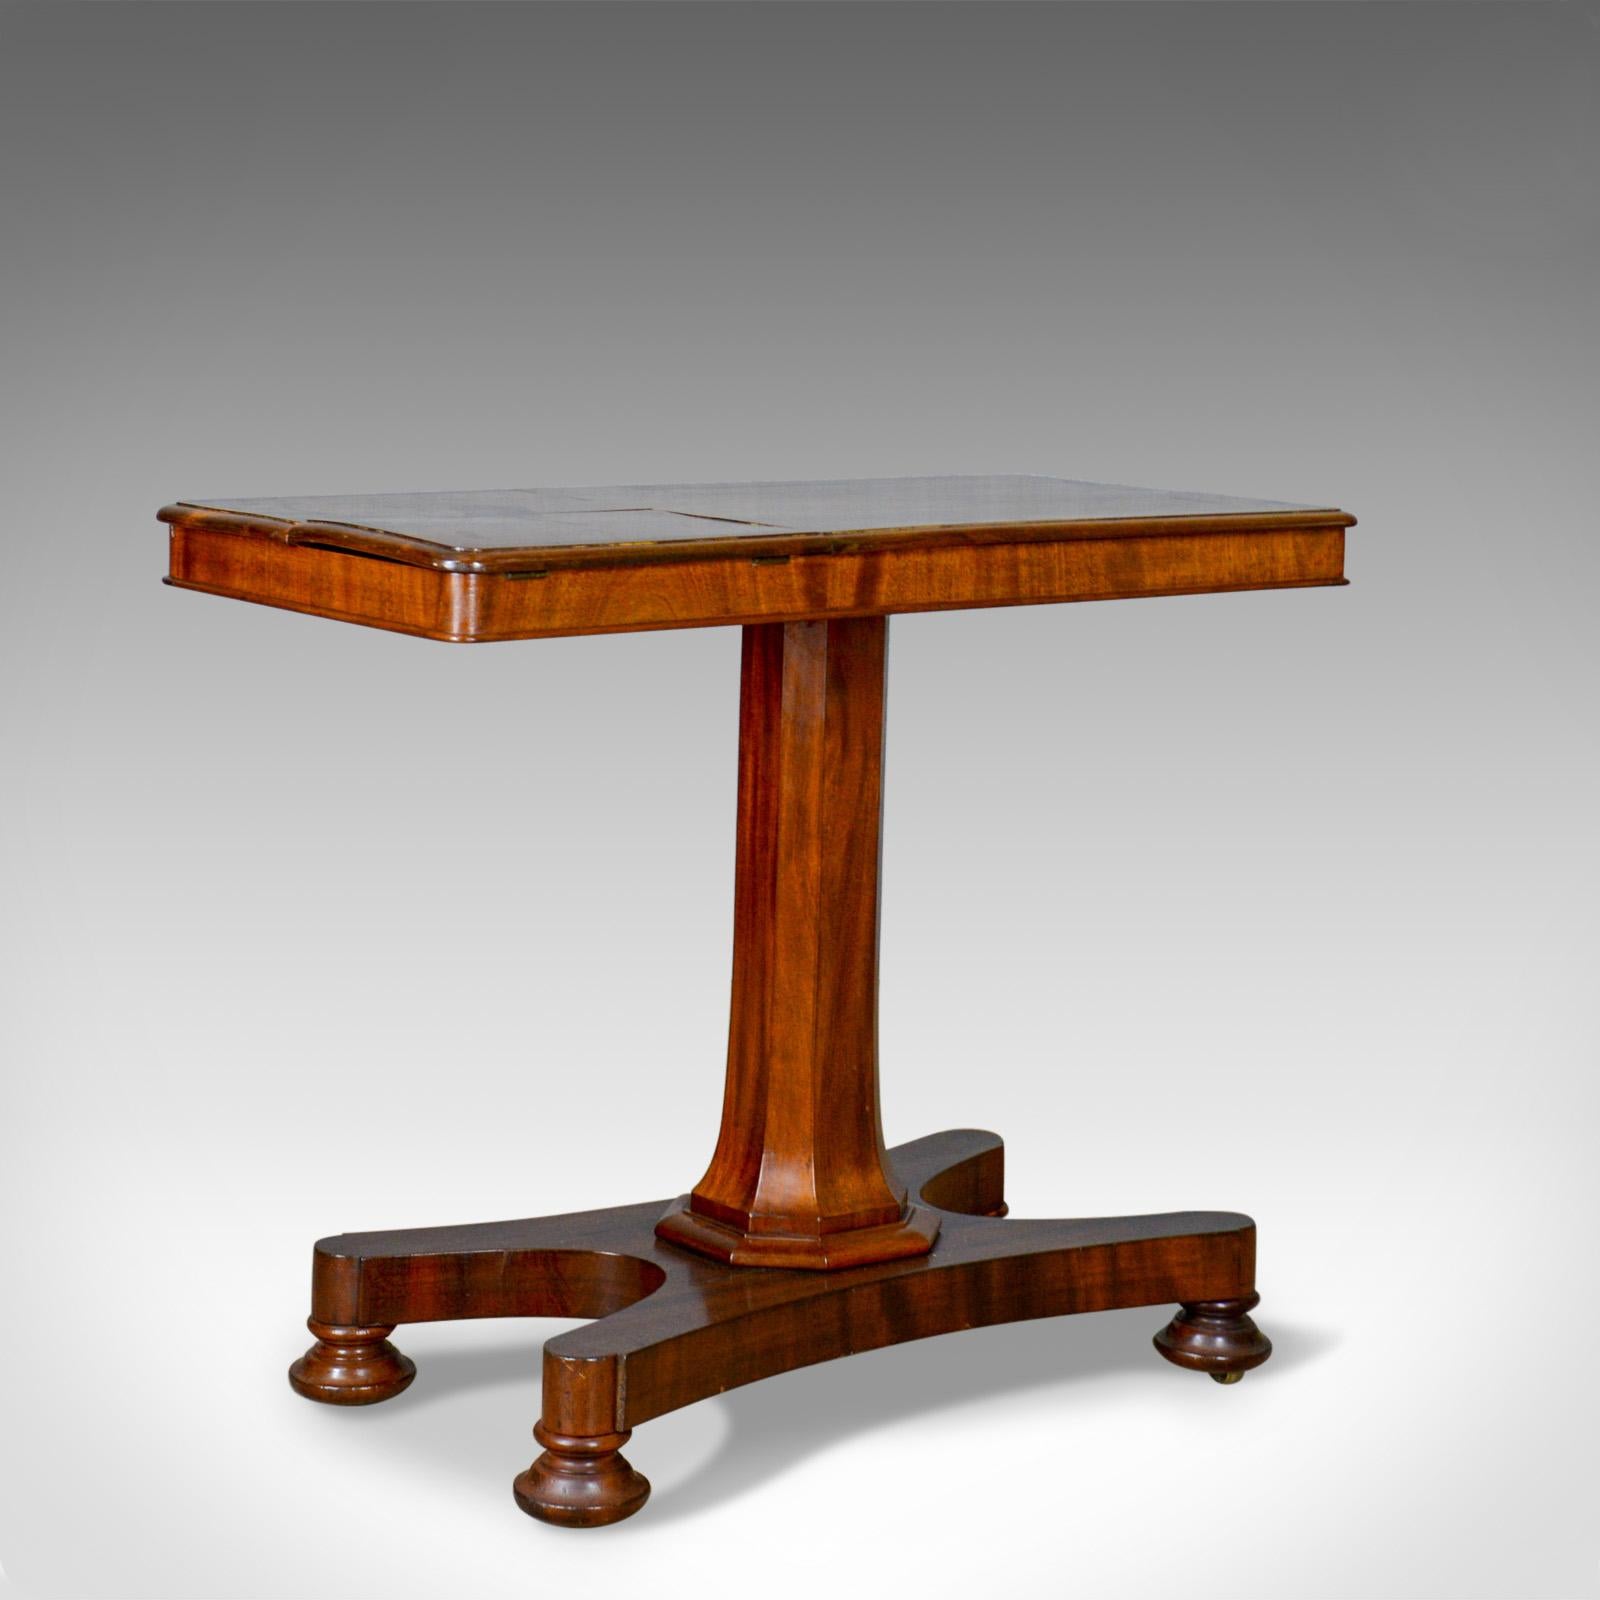 Victorian Antique Reading Table, Duet Music Stand in the Manner of Gillows, circa 1870